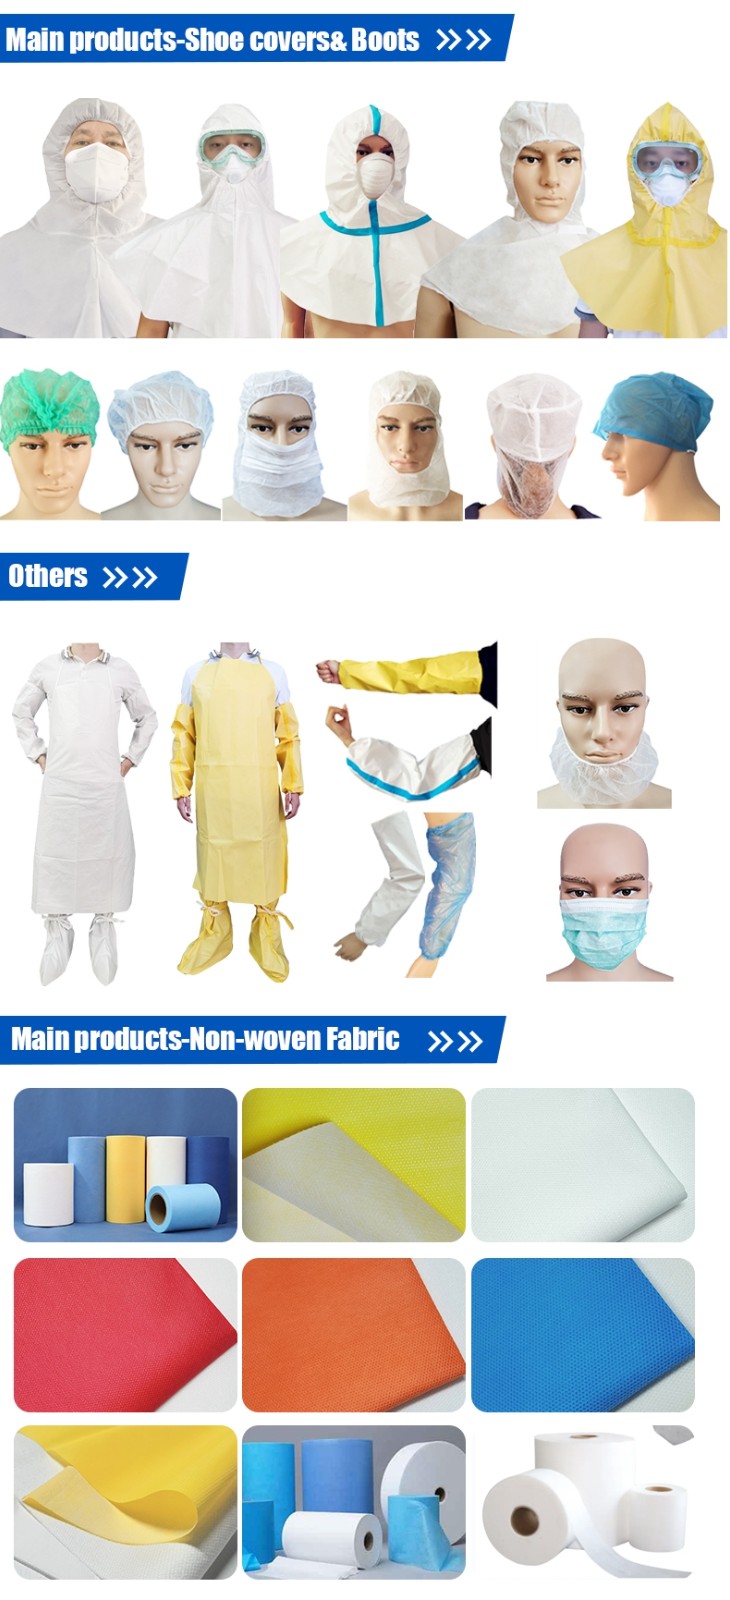 TYPE4/5/6 disposable protective work wear 